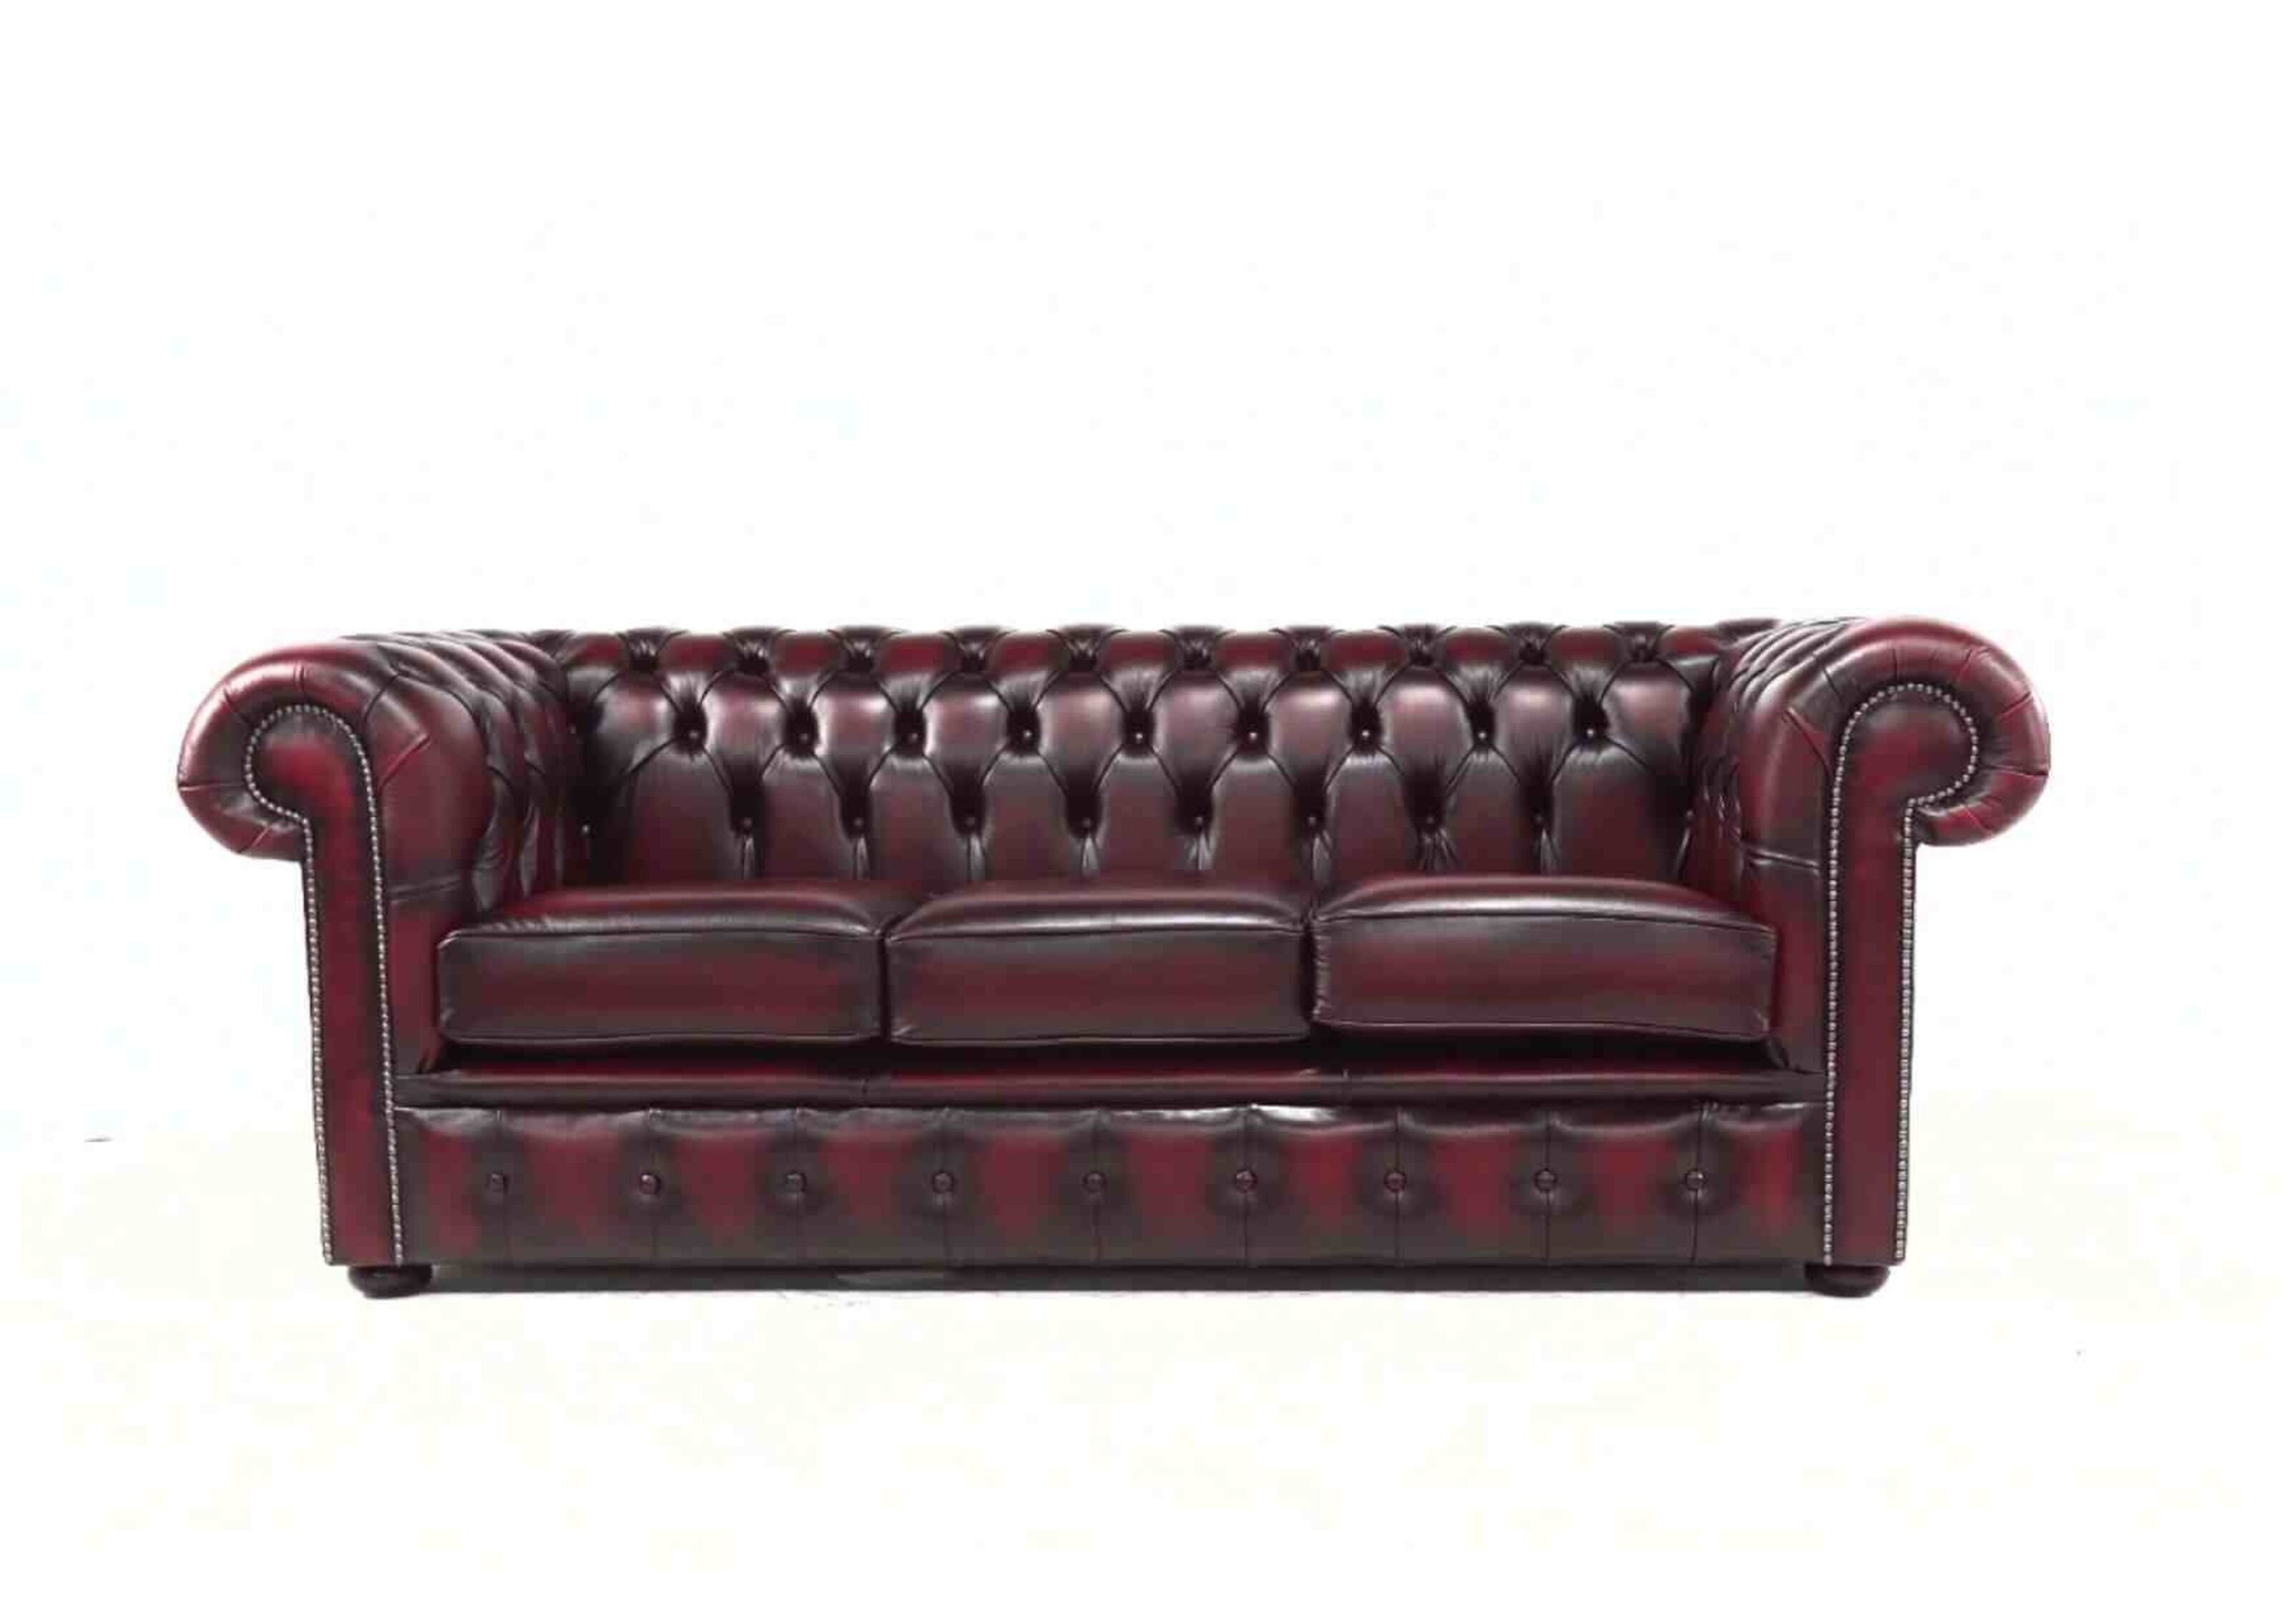 Timeless Creations The Historical Timeline of Chesterfield Sofas  %Post Title